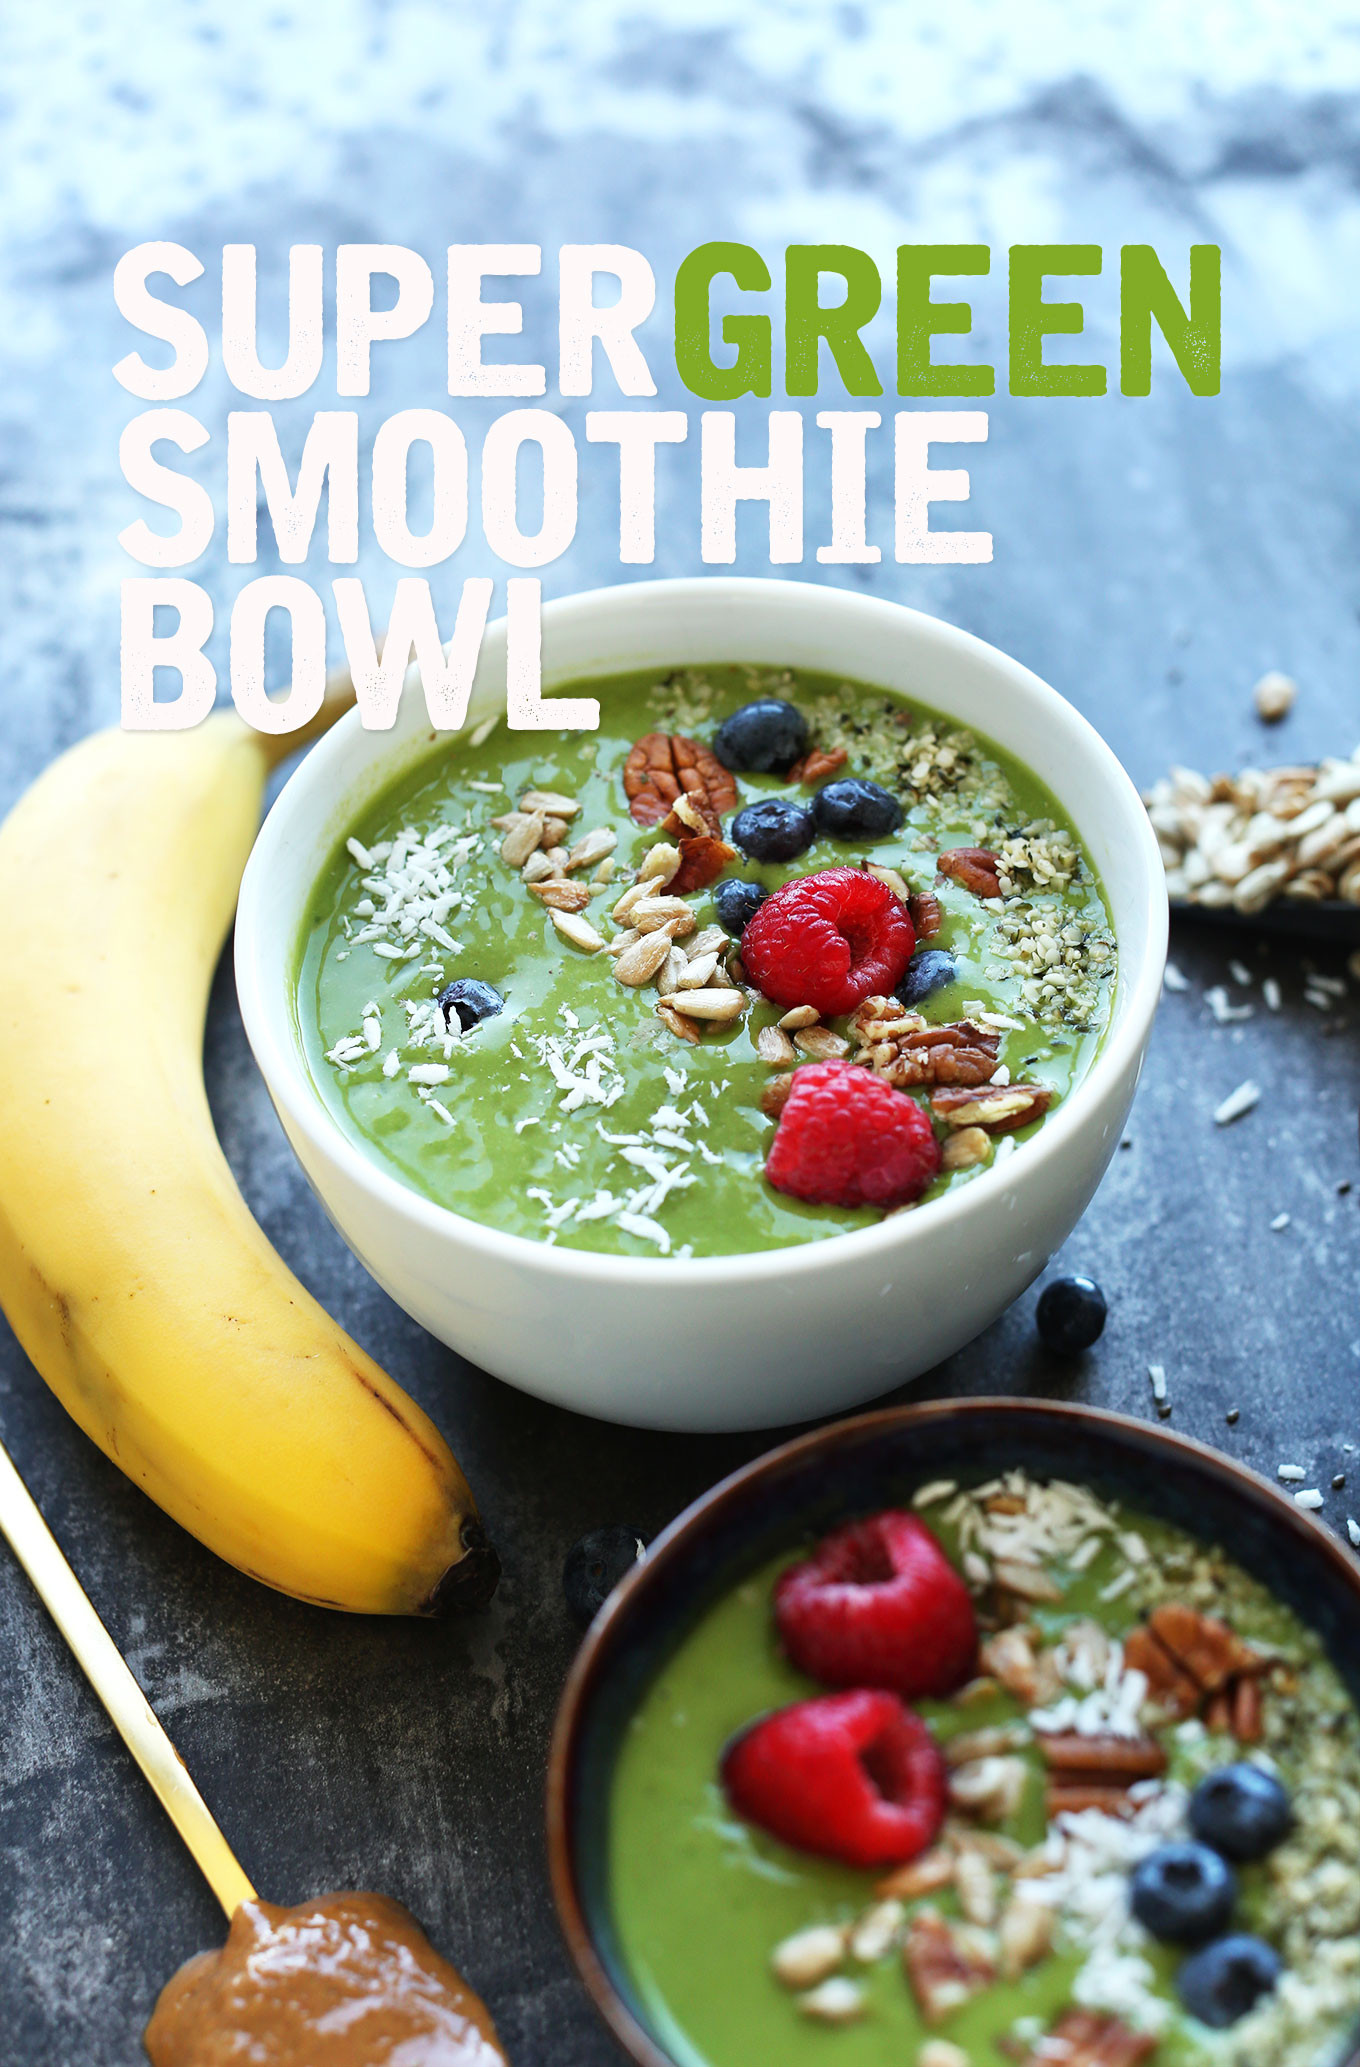 Super Healthy Breakfast Smoothies
 Super Green Smoothie Bowl